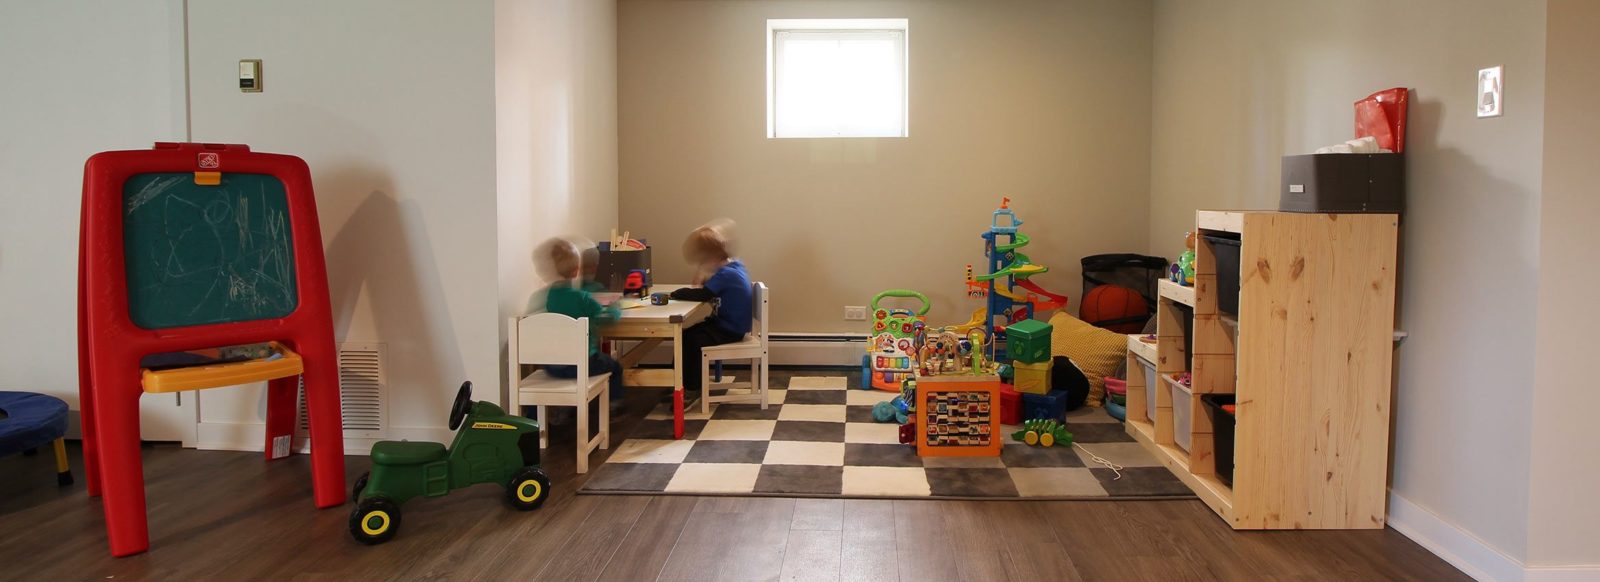 two children playing at a table in a basement playroom surrounded by other toys on a patterned rug